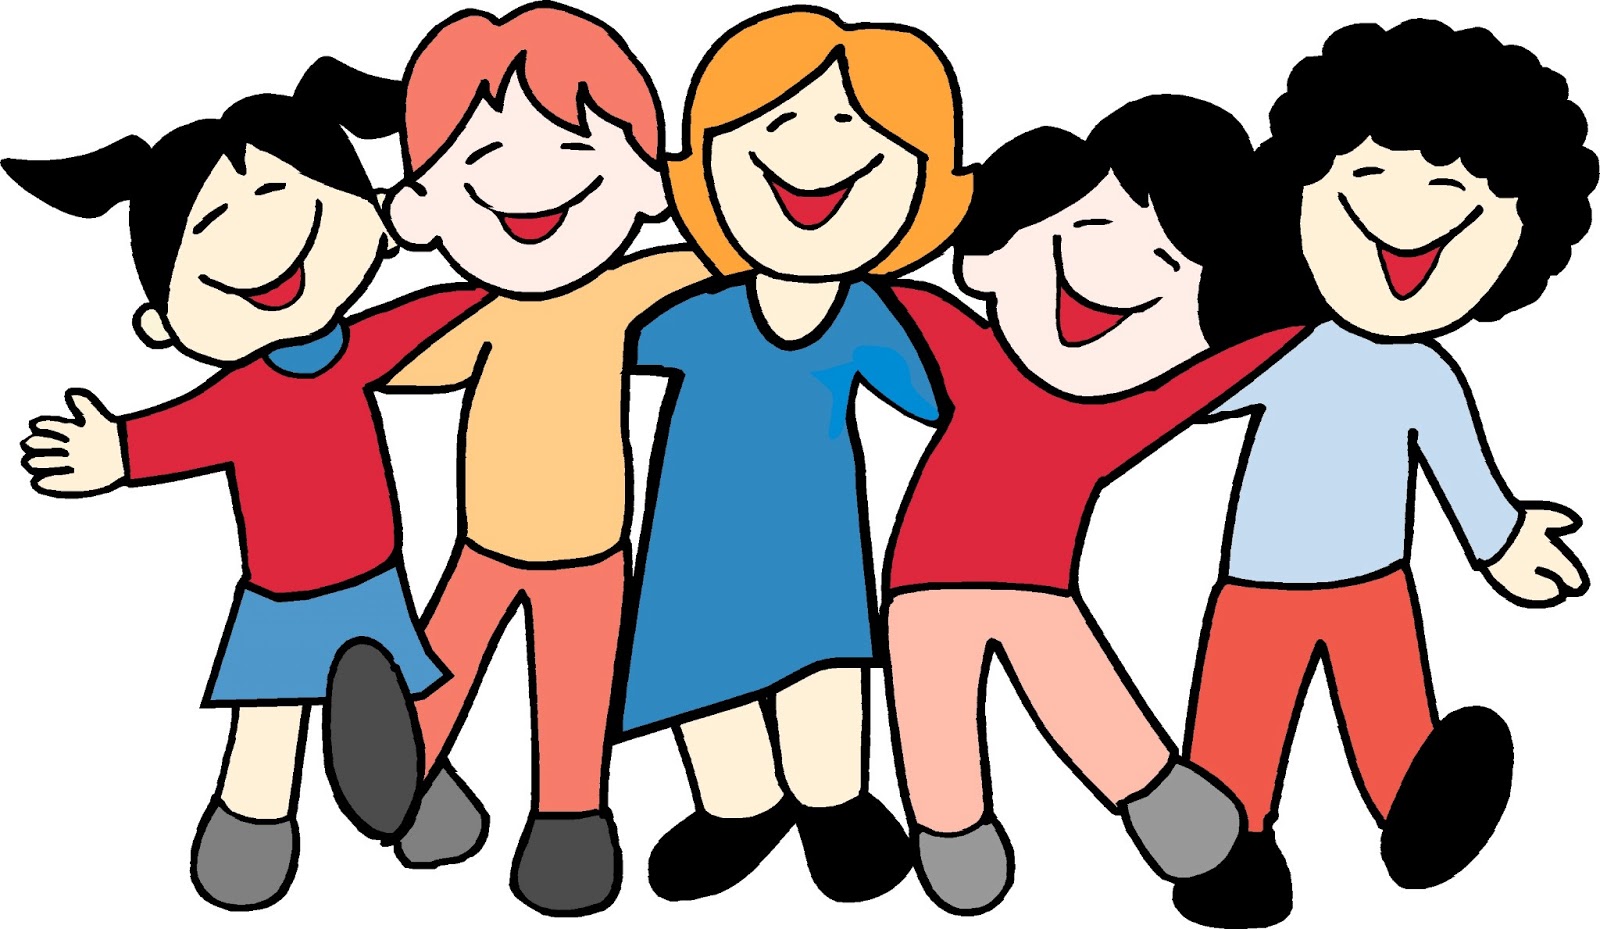 Friendship clip art free free clipart images 3